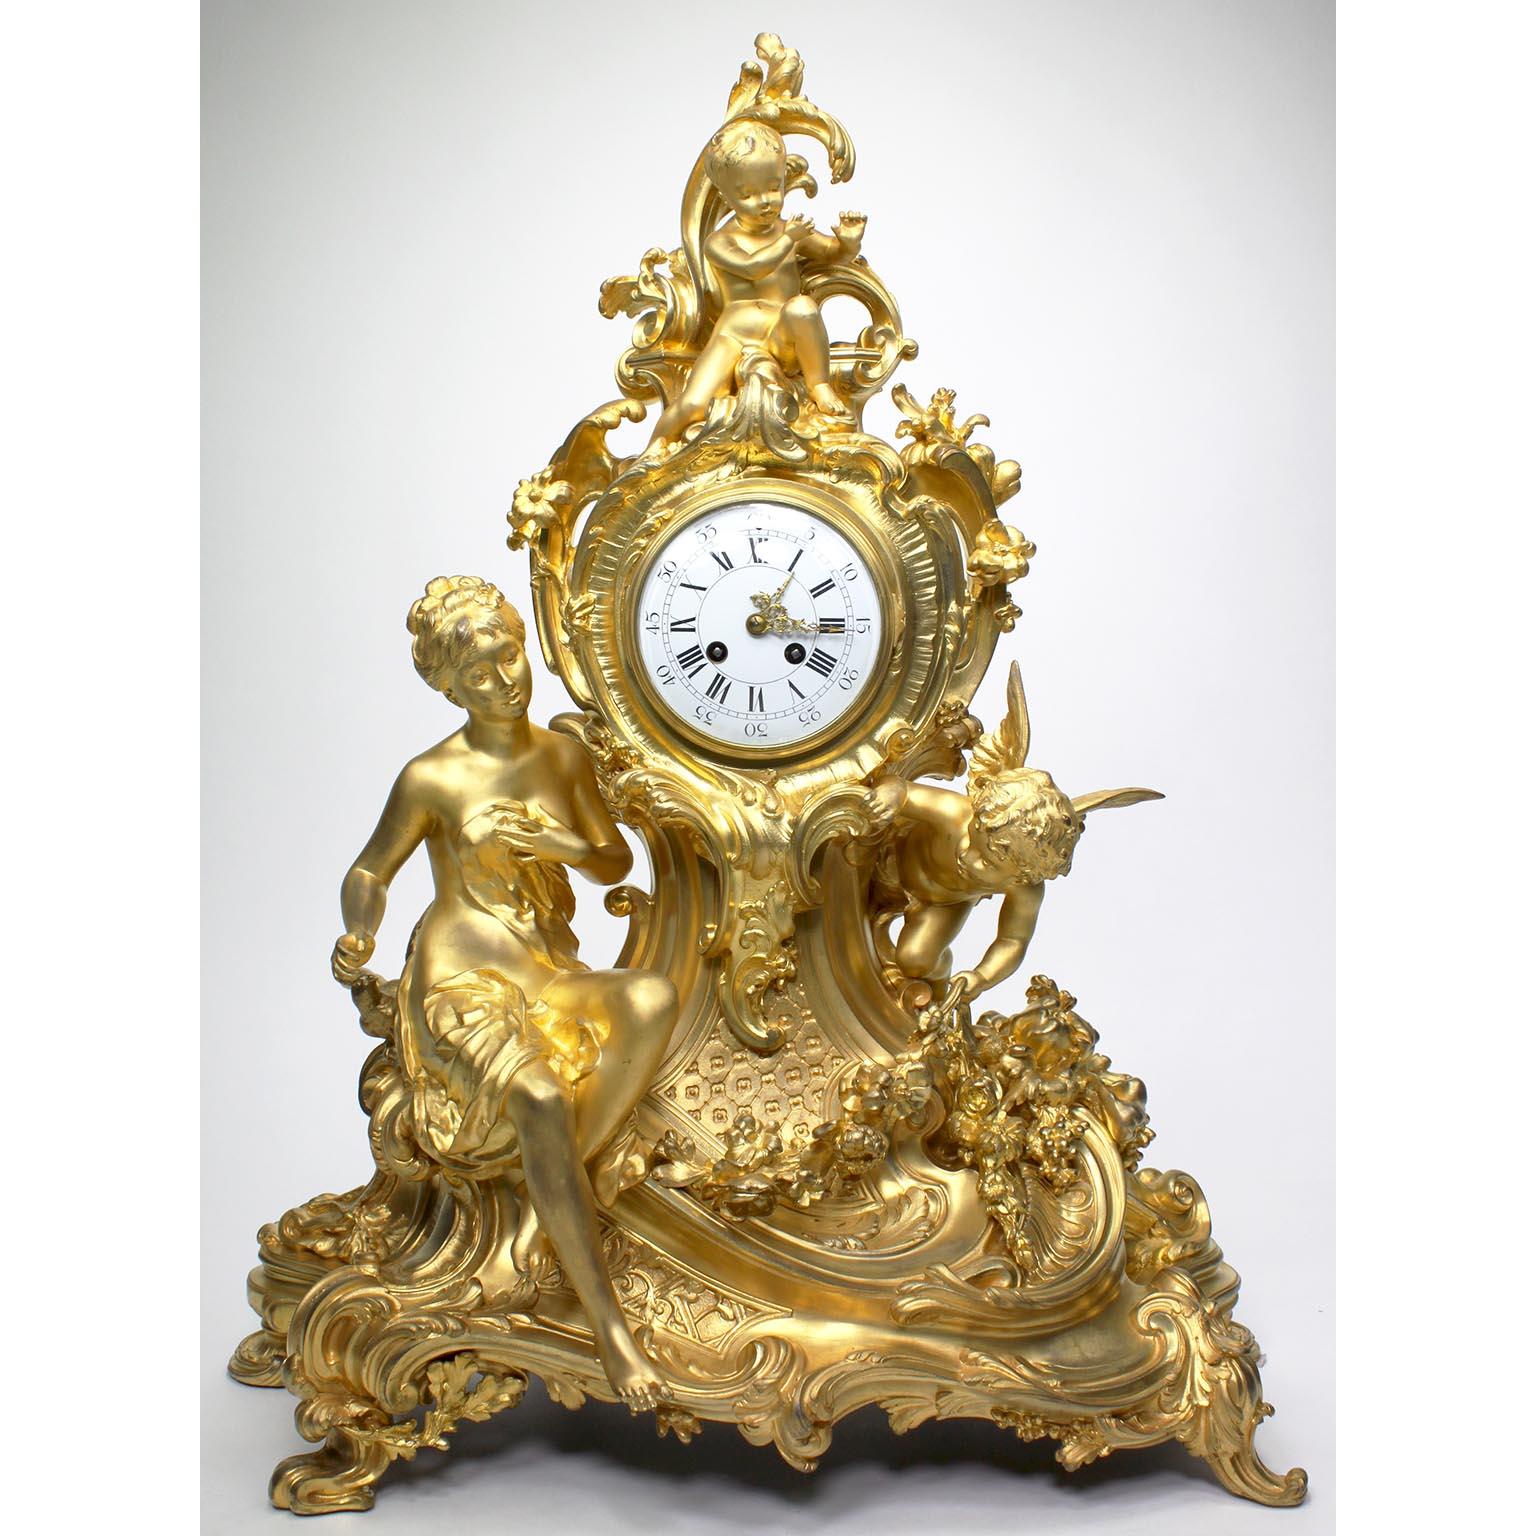 An Important and Palatial French Louis XV Style 19th century Gilt-Bronze Cherub and Maiden Mantel Clock 